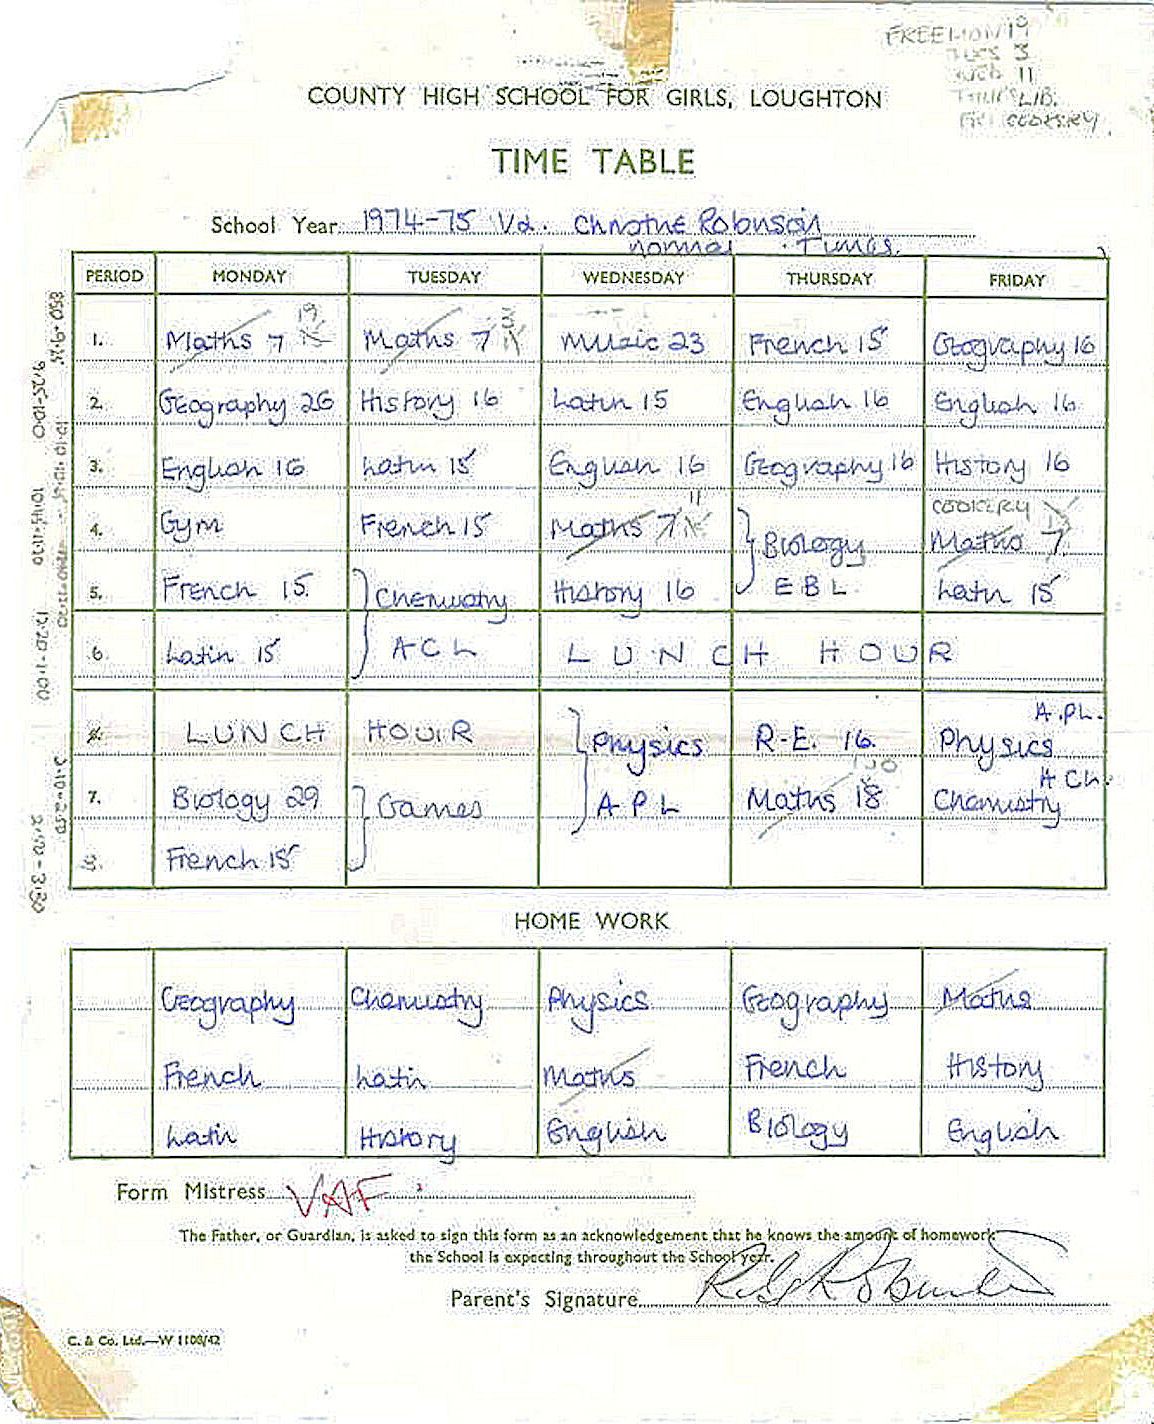 Fifth Form Timetable 1974/5